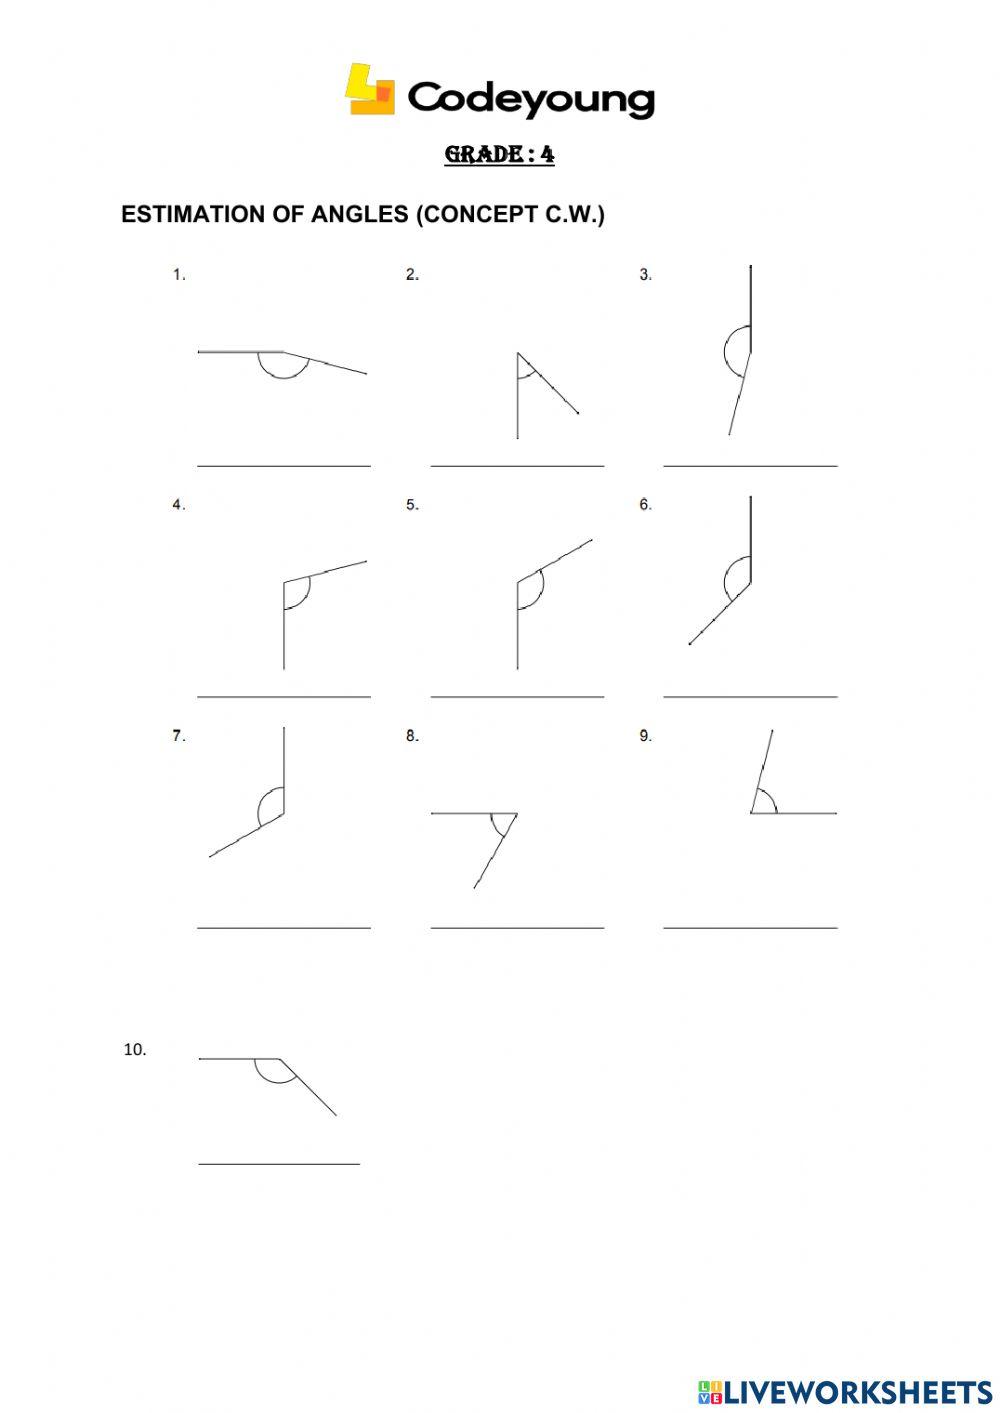 EstIMATION OF ANGLES (CONCEPT C.W.)